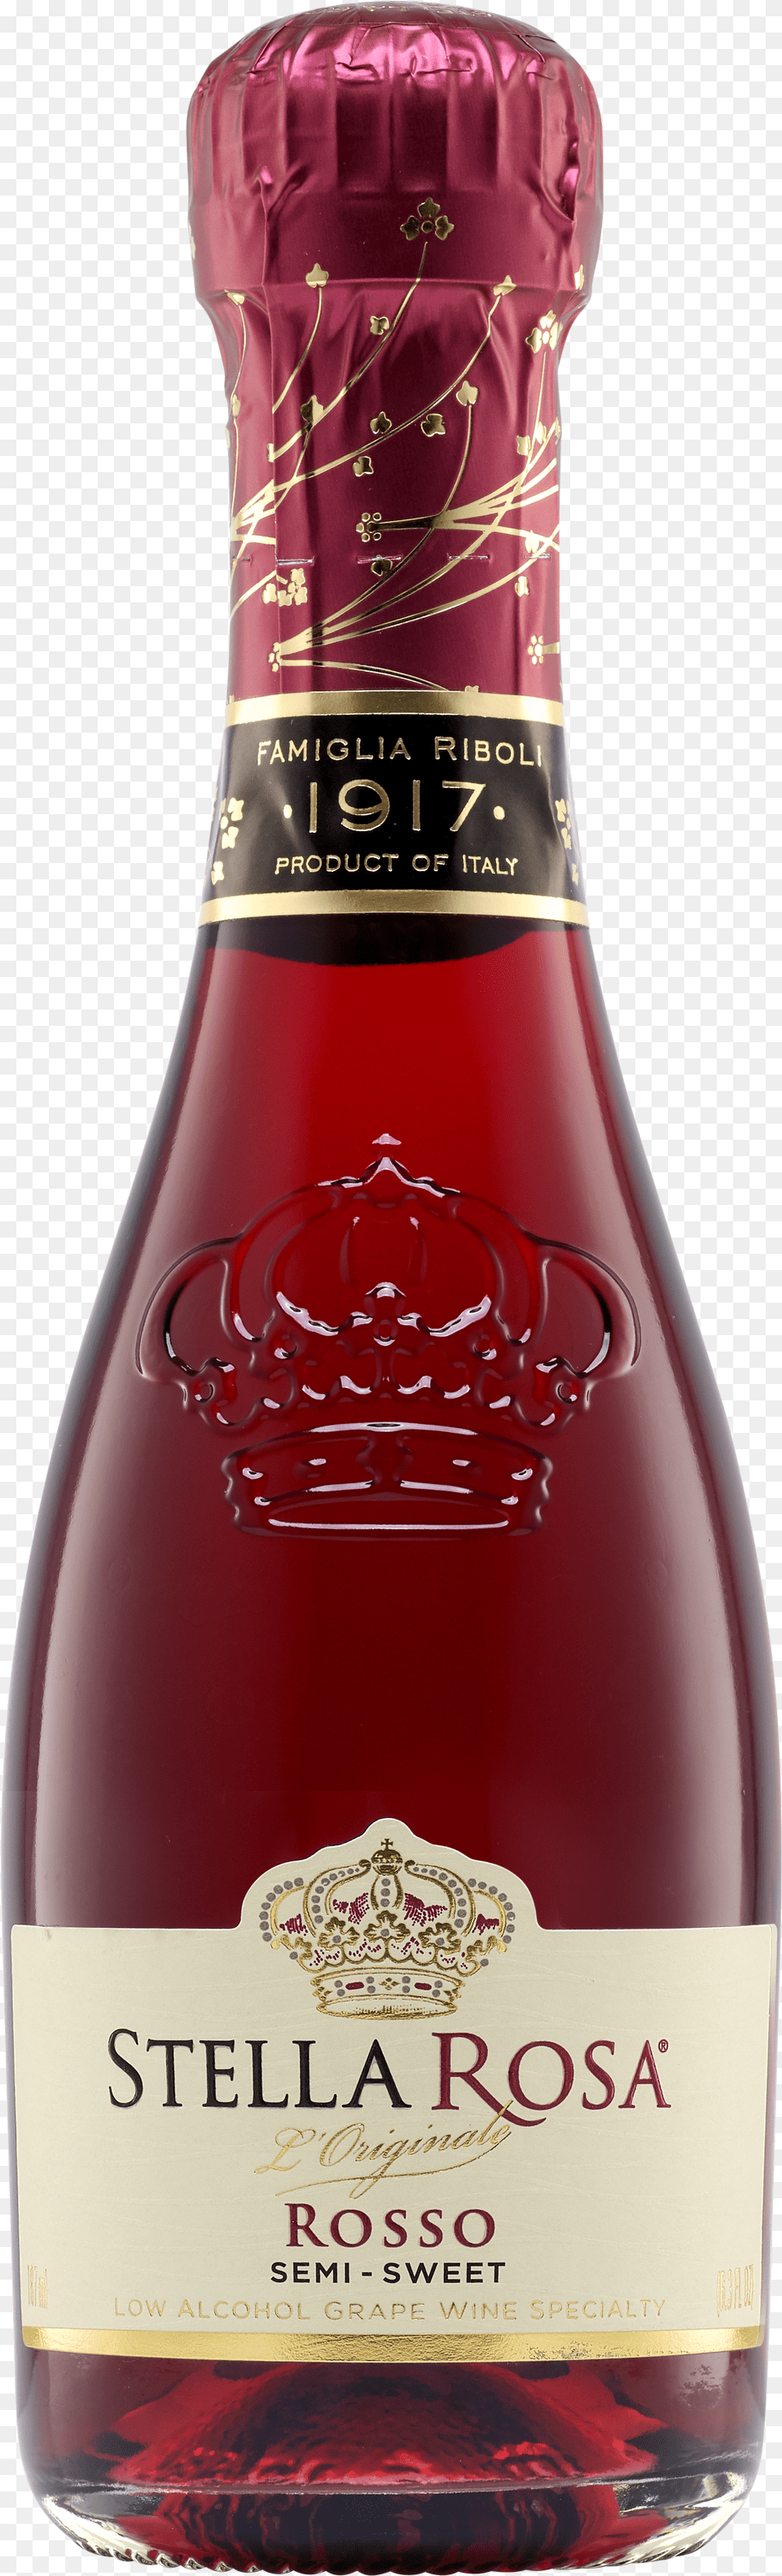 Bottle Shot Rosso Cheesecake, Logo Png Image